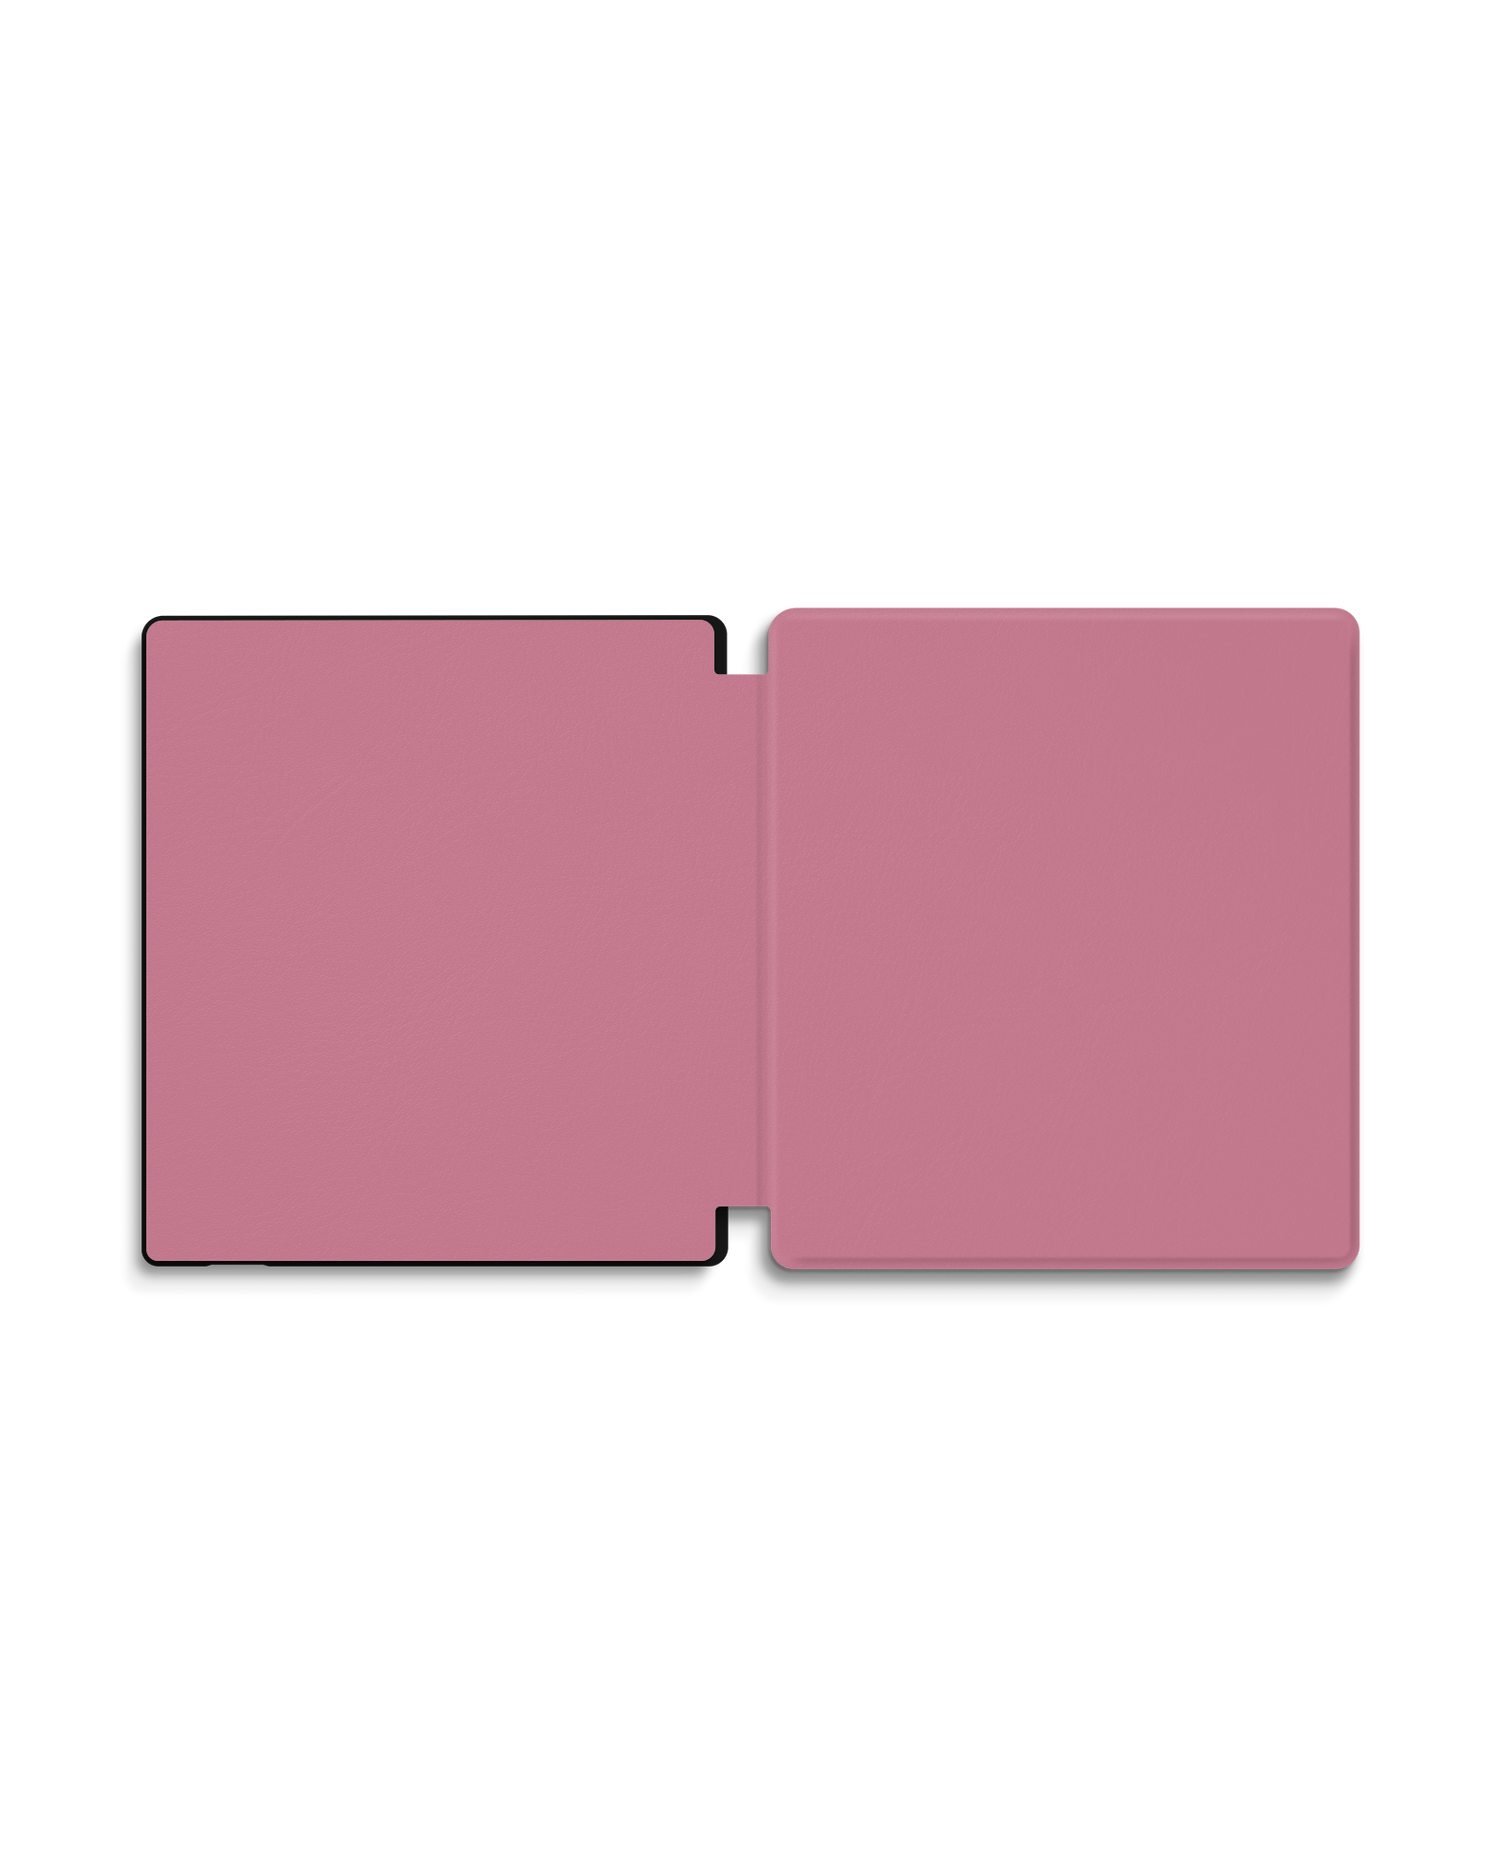 WILD ROSE eReader Smart Case for Amazon Kindle Oasis: Opened exterior view